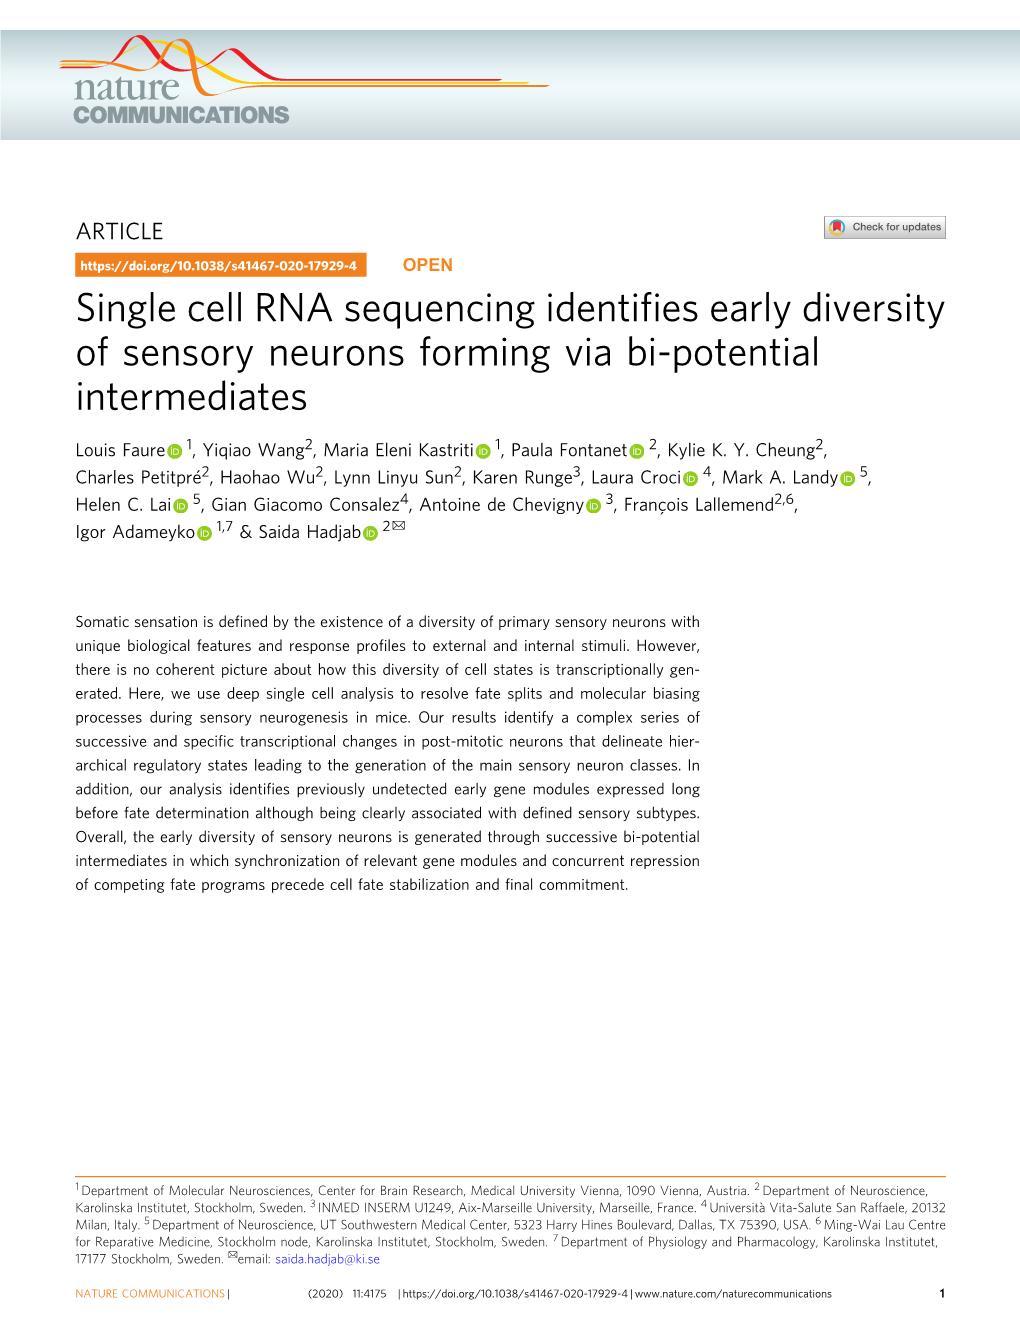 Single Cell RNA Sequencing Identifies Early Diversity of Sensory Neurons